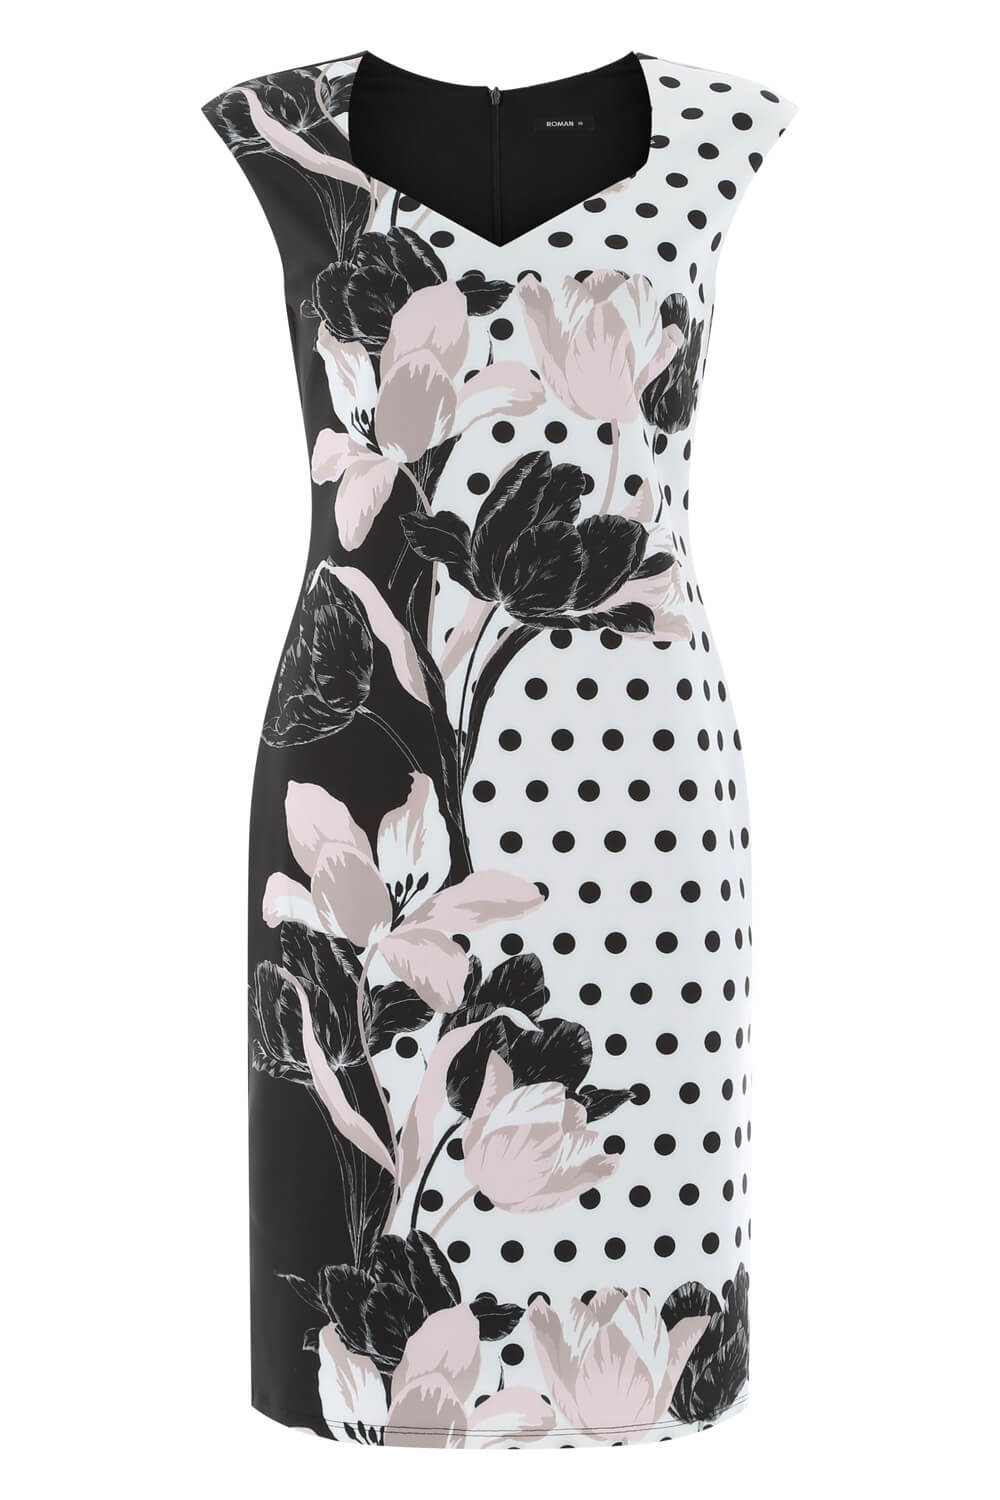 Black Sweetheart Spot Floral Stretch Dress, Image 5 of 5